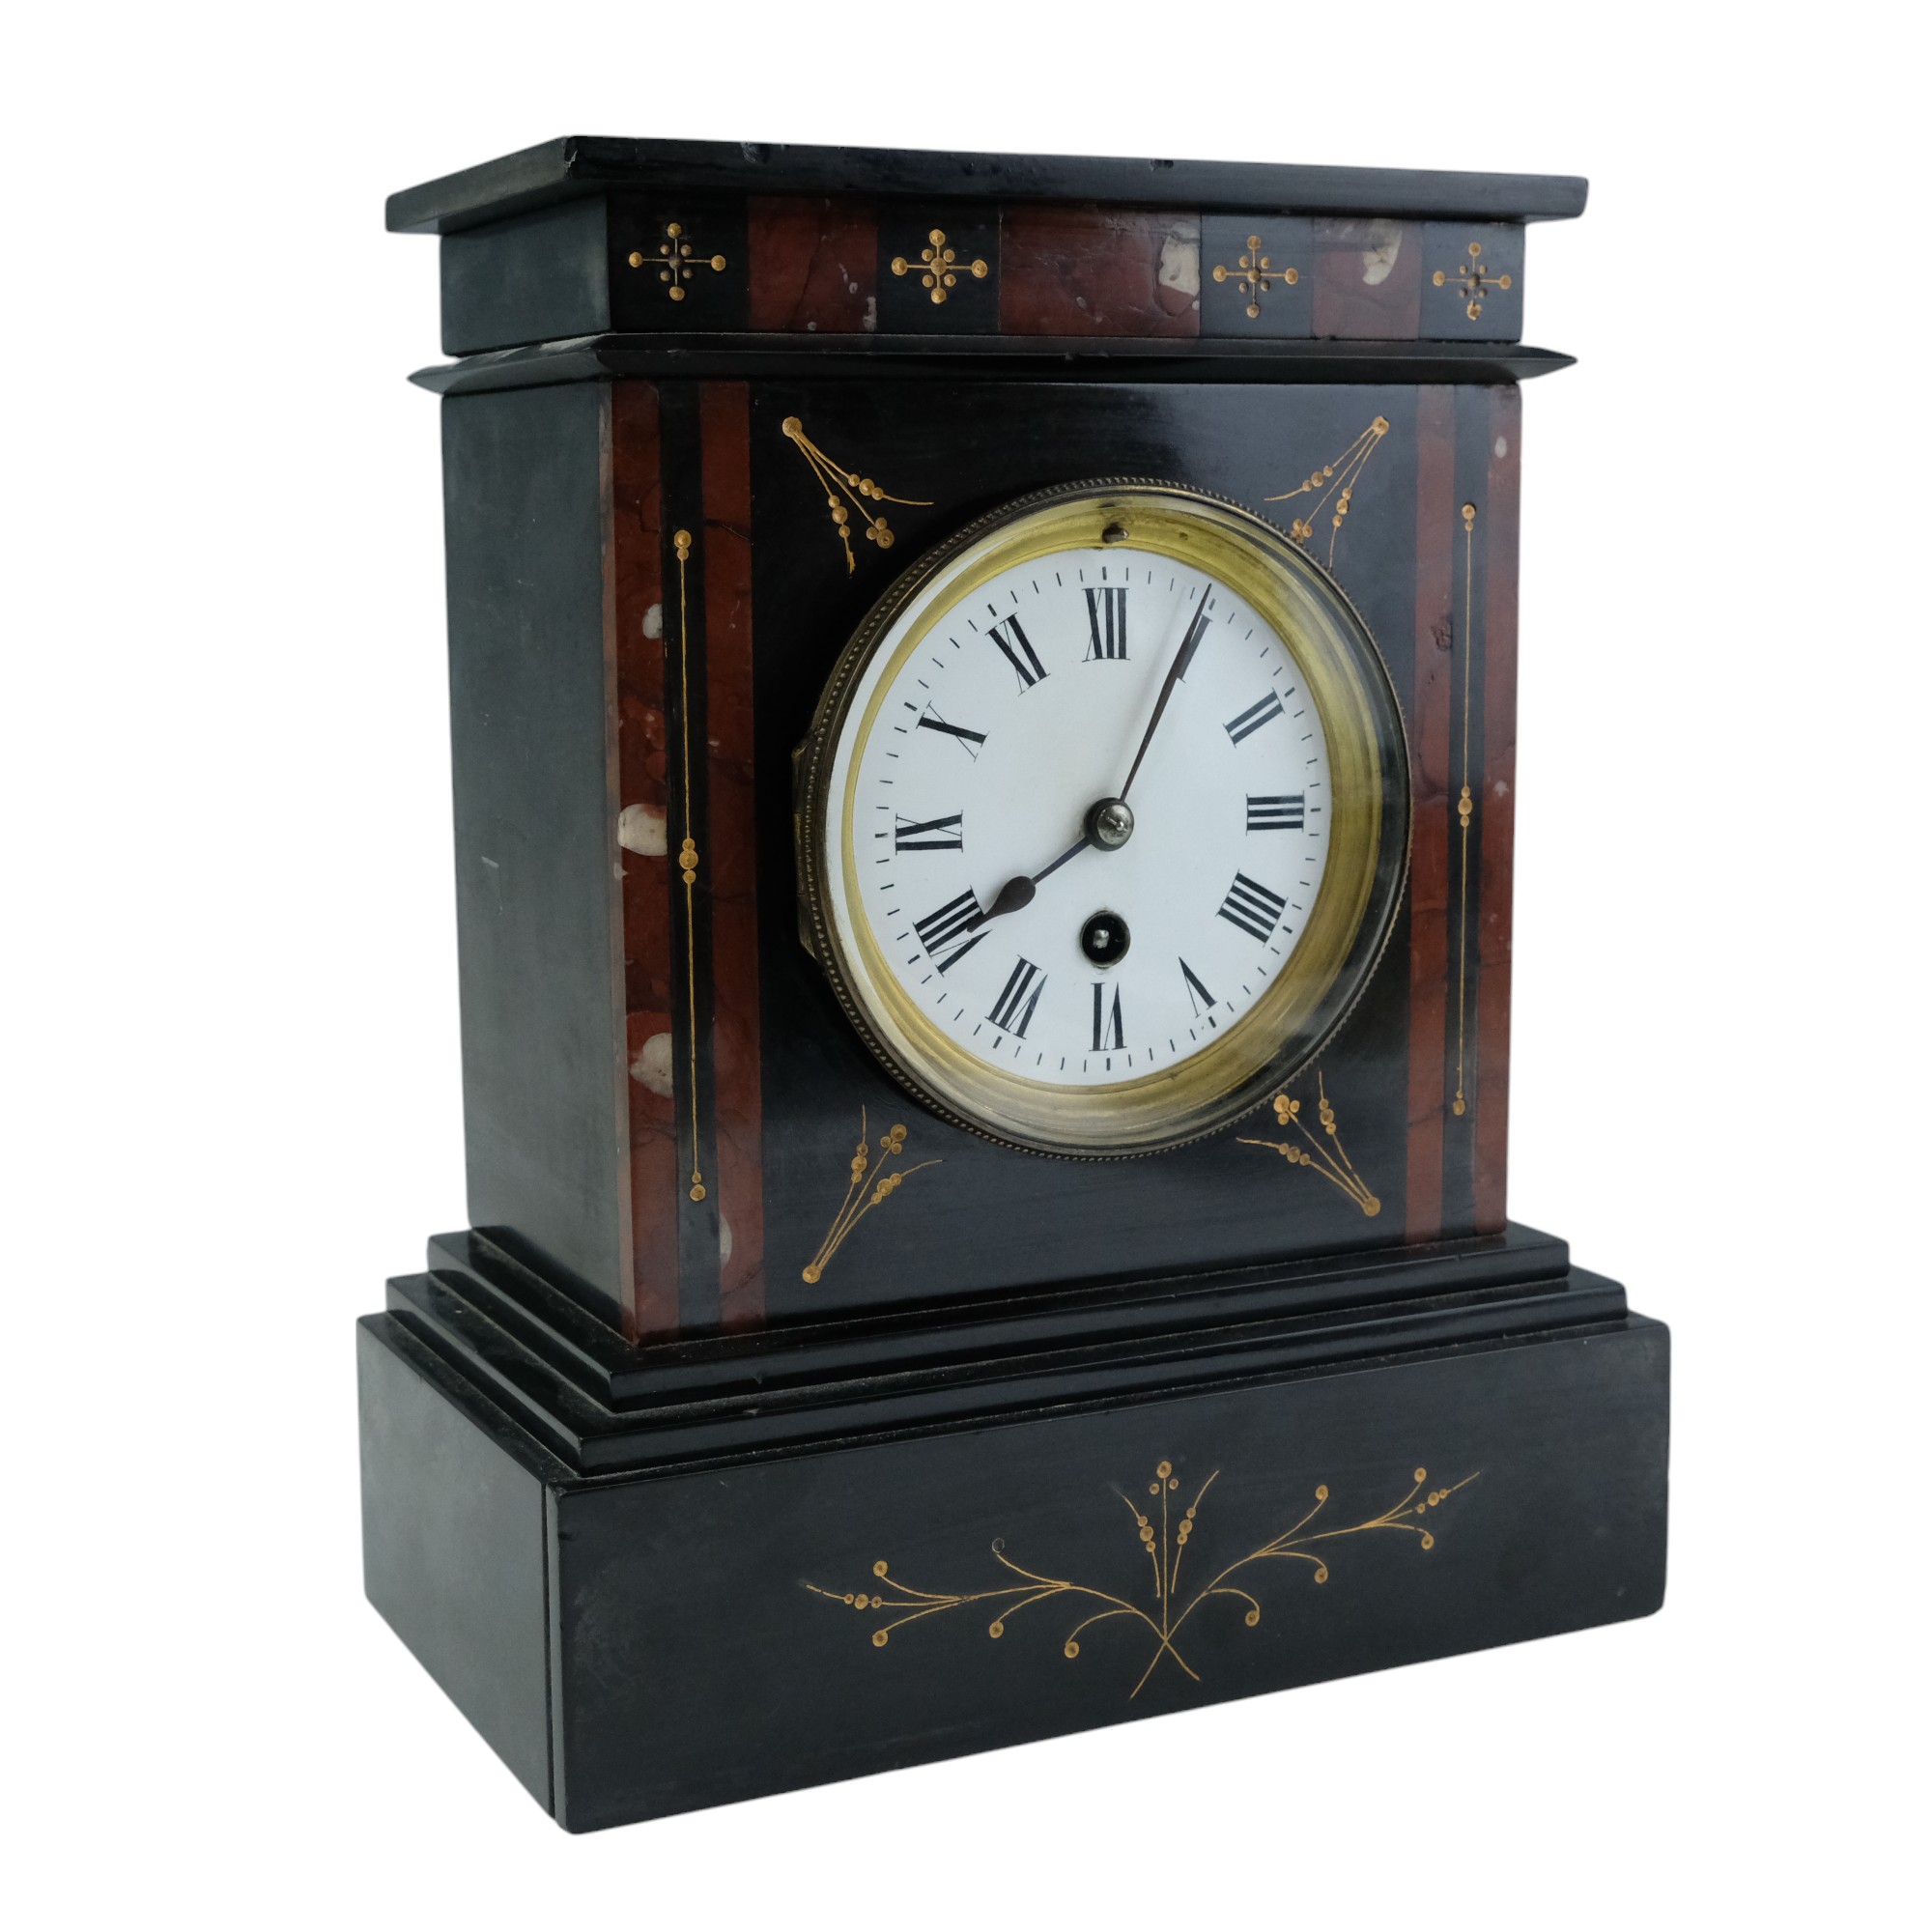 A Victorian parcel-gilt polished slate and red marble mantle clock having a single train movement,